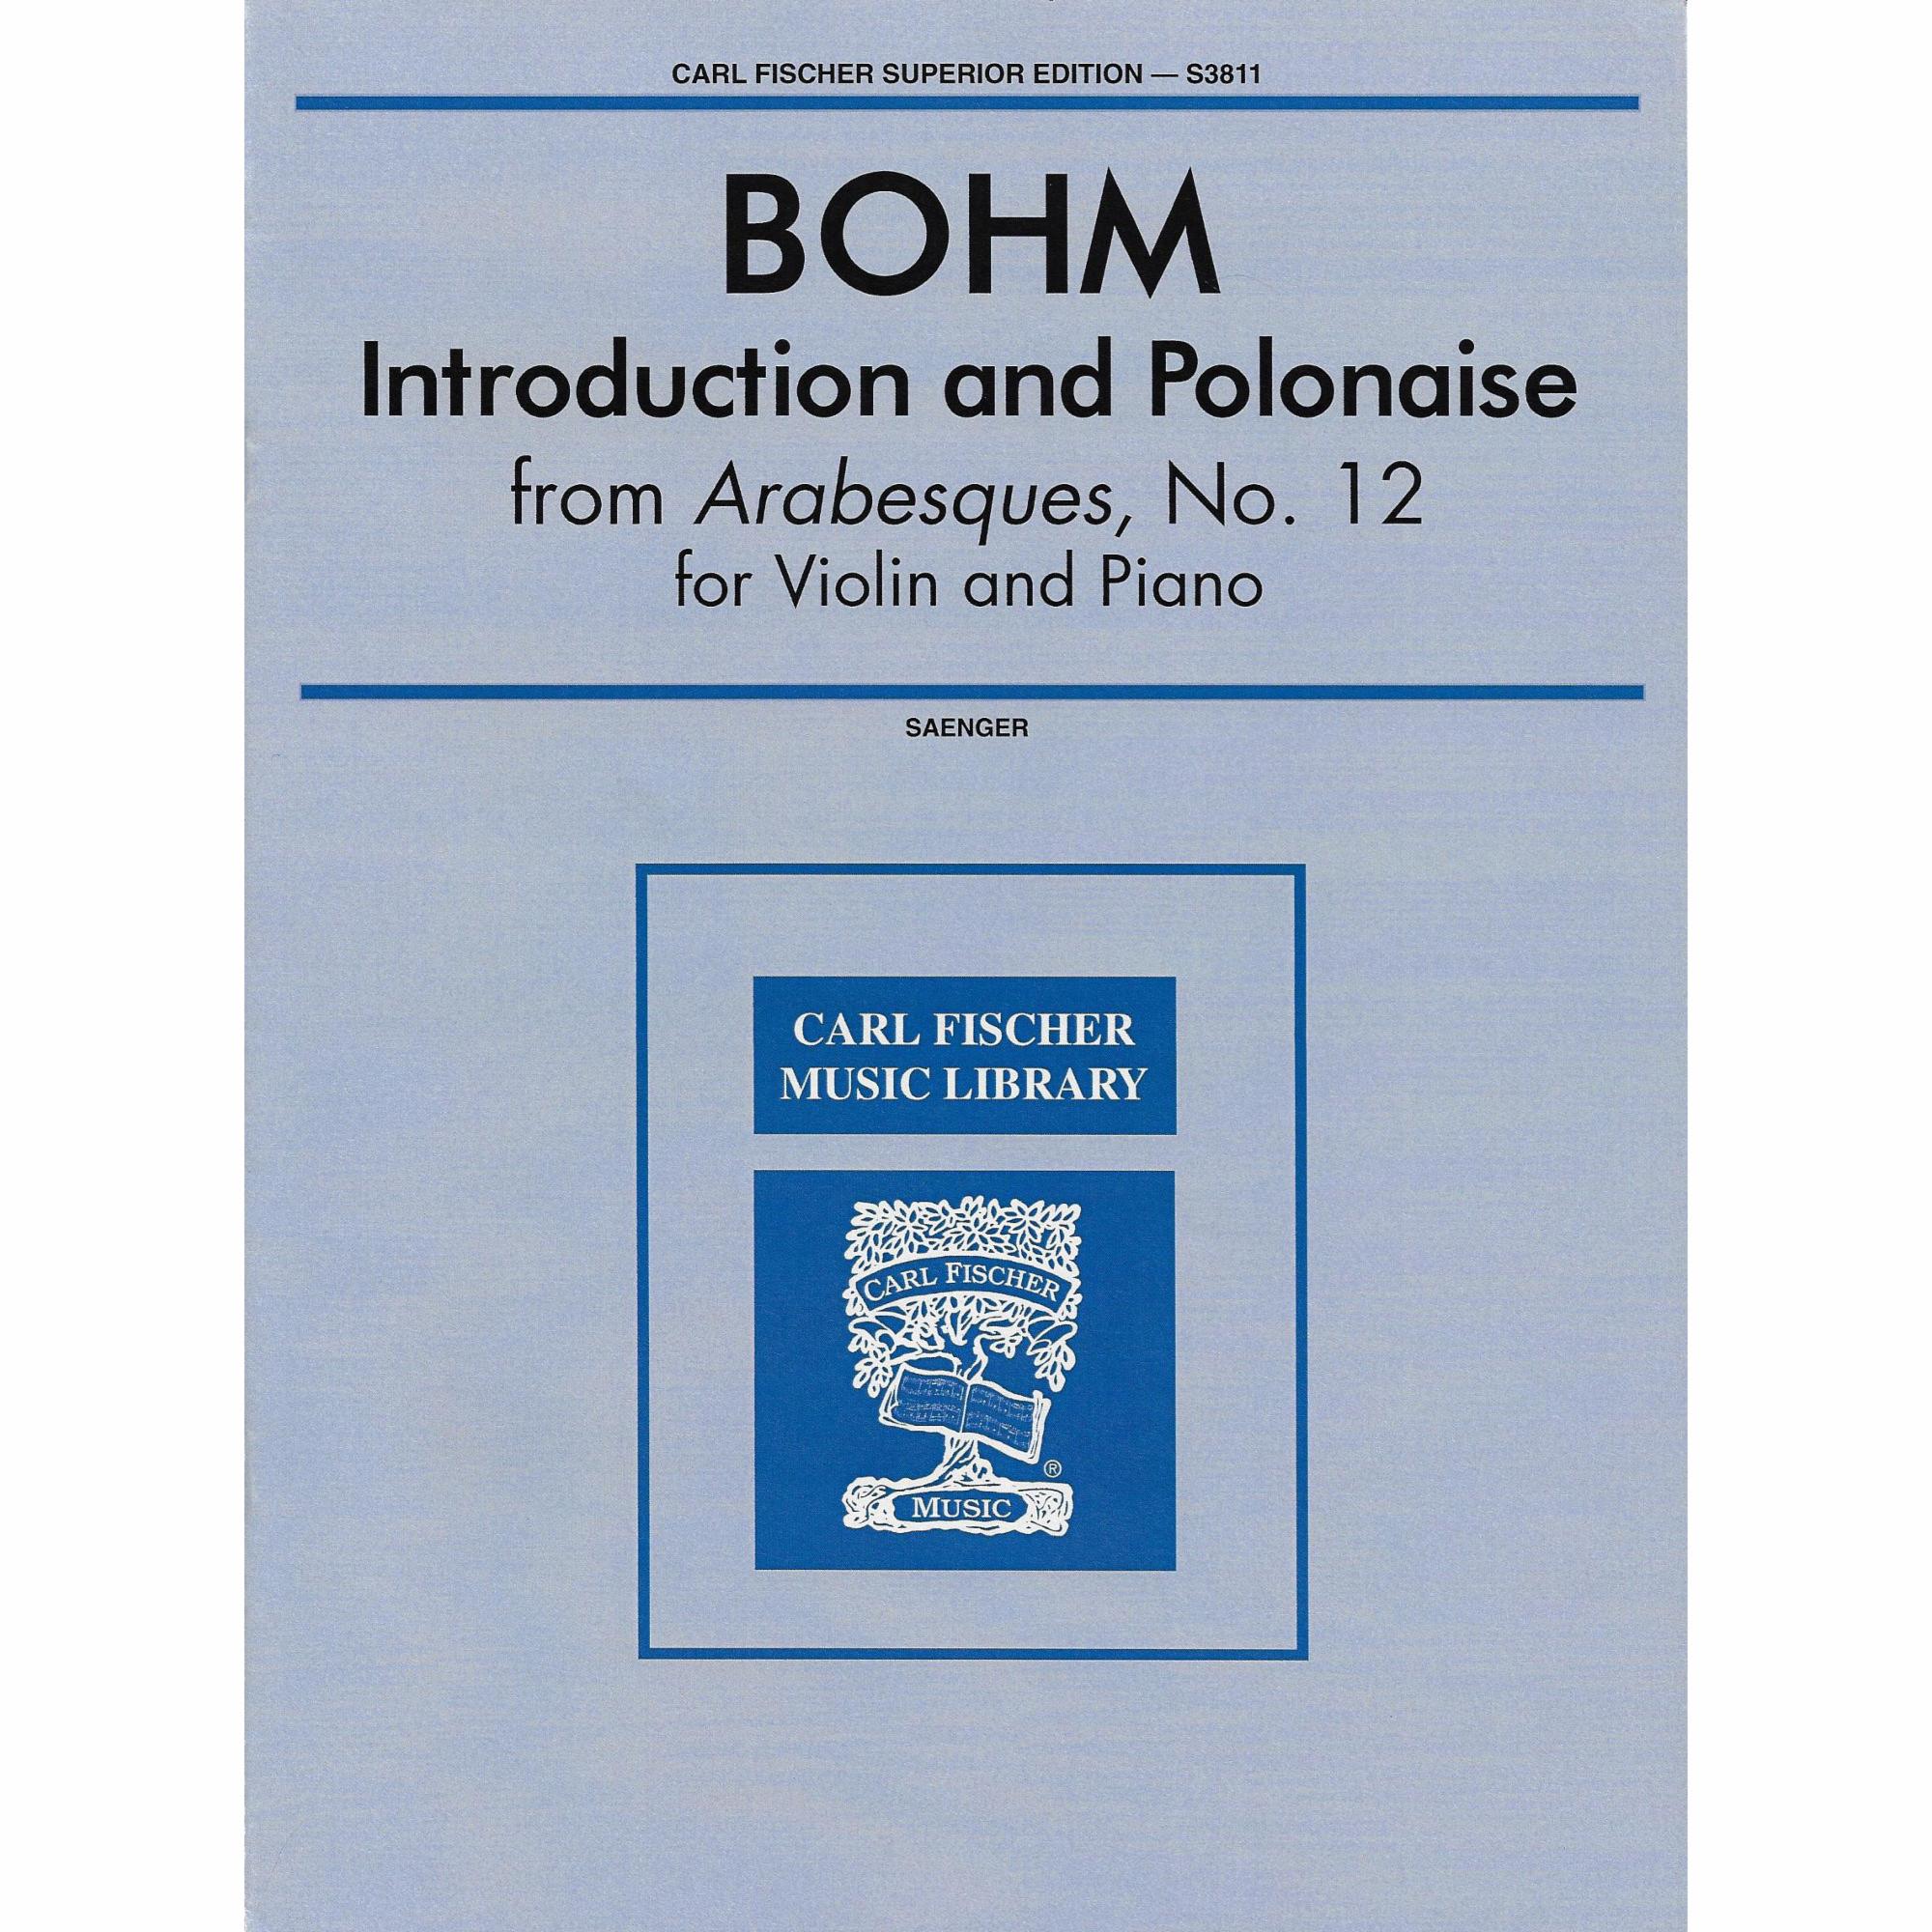 Bohm -- Introduction and Polonaise for Violin and Piano